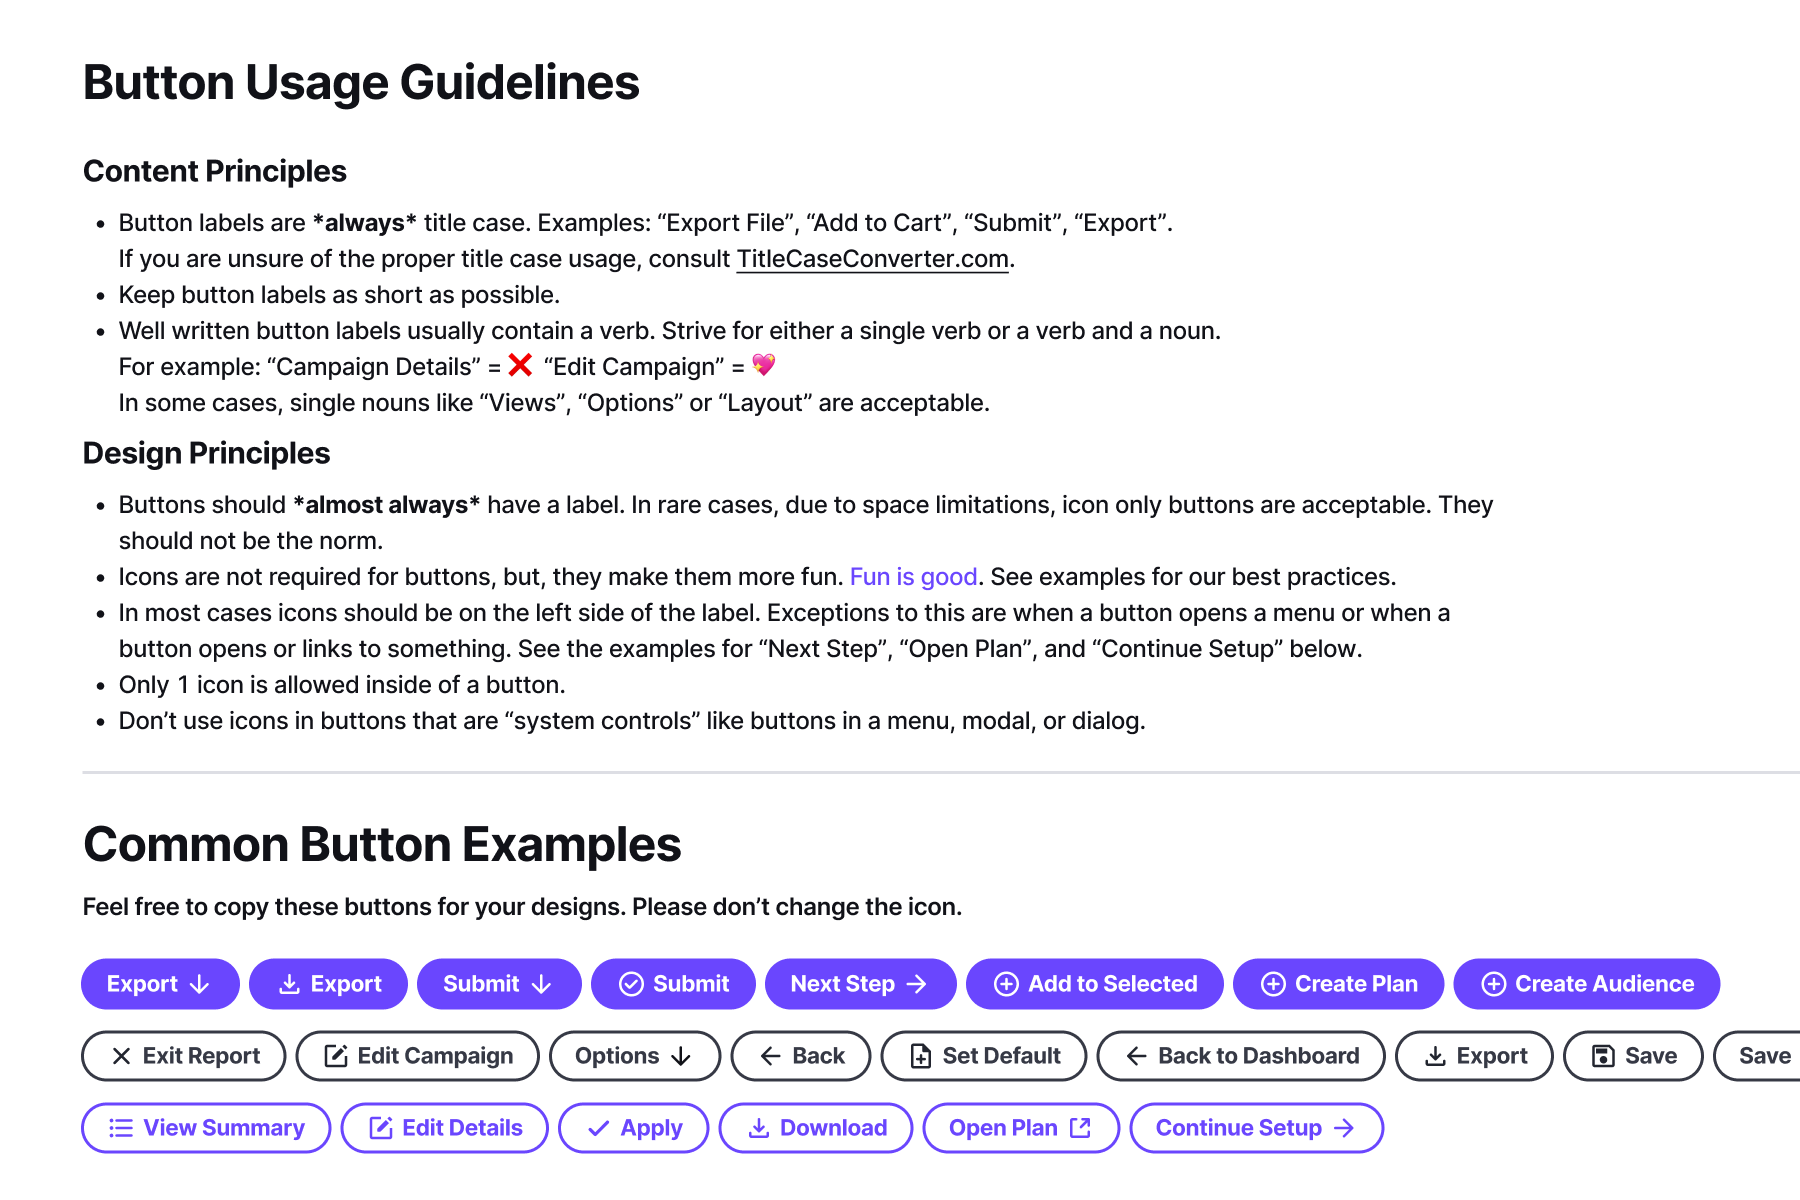 Button content and usage guidelines